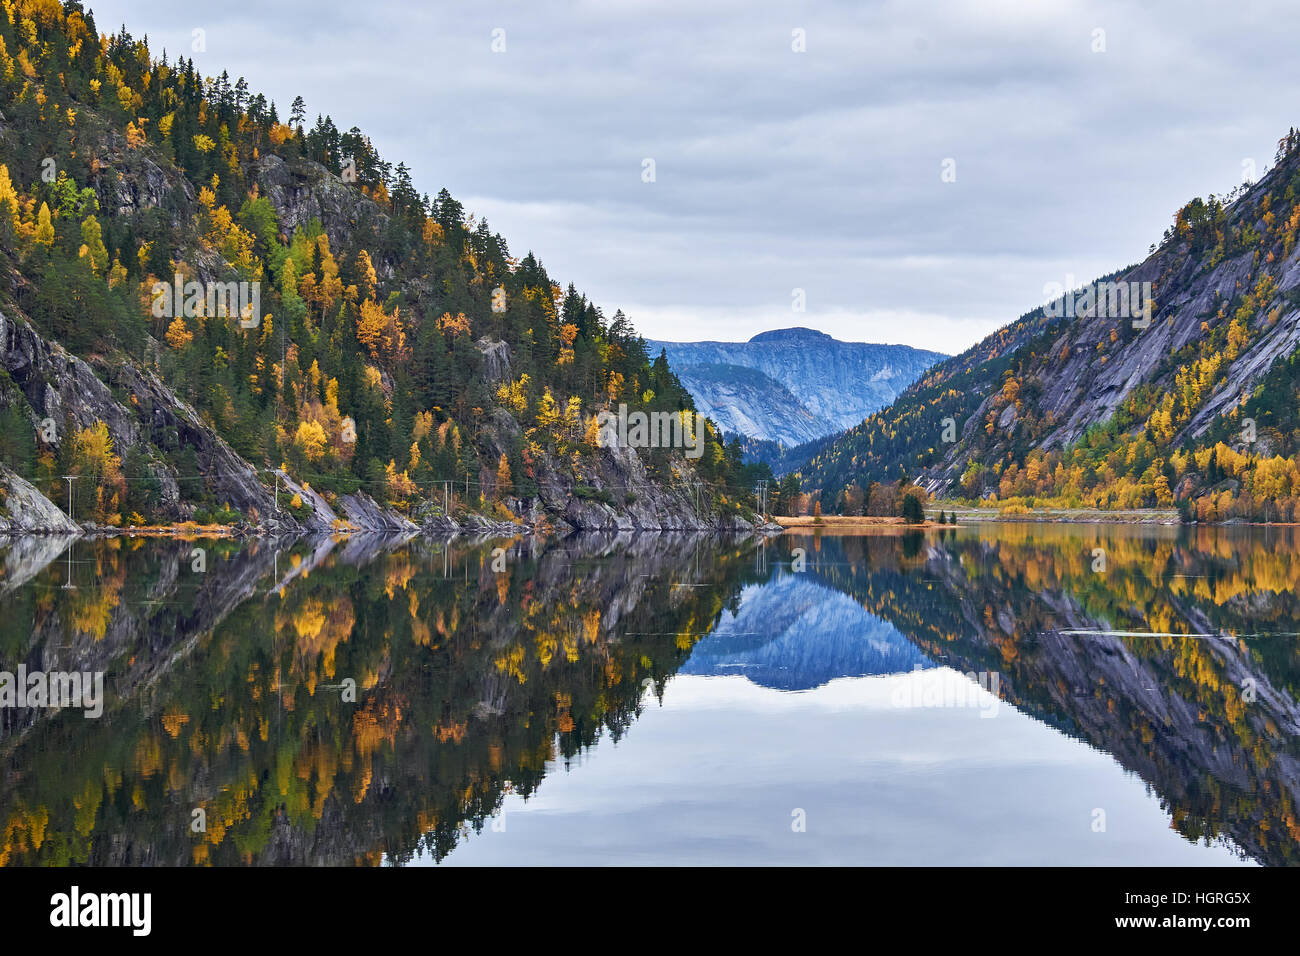 Completely calm waters on lake Flaani, between mountain sides covered in autumn colored trees, near route 9 in southern Norway Stock Photo